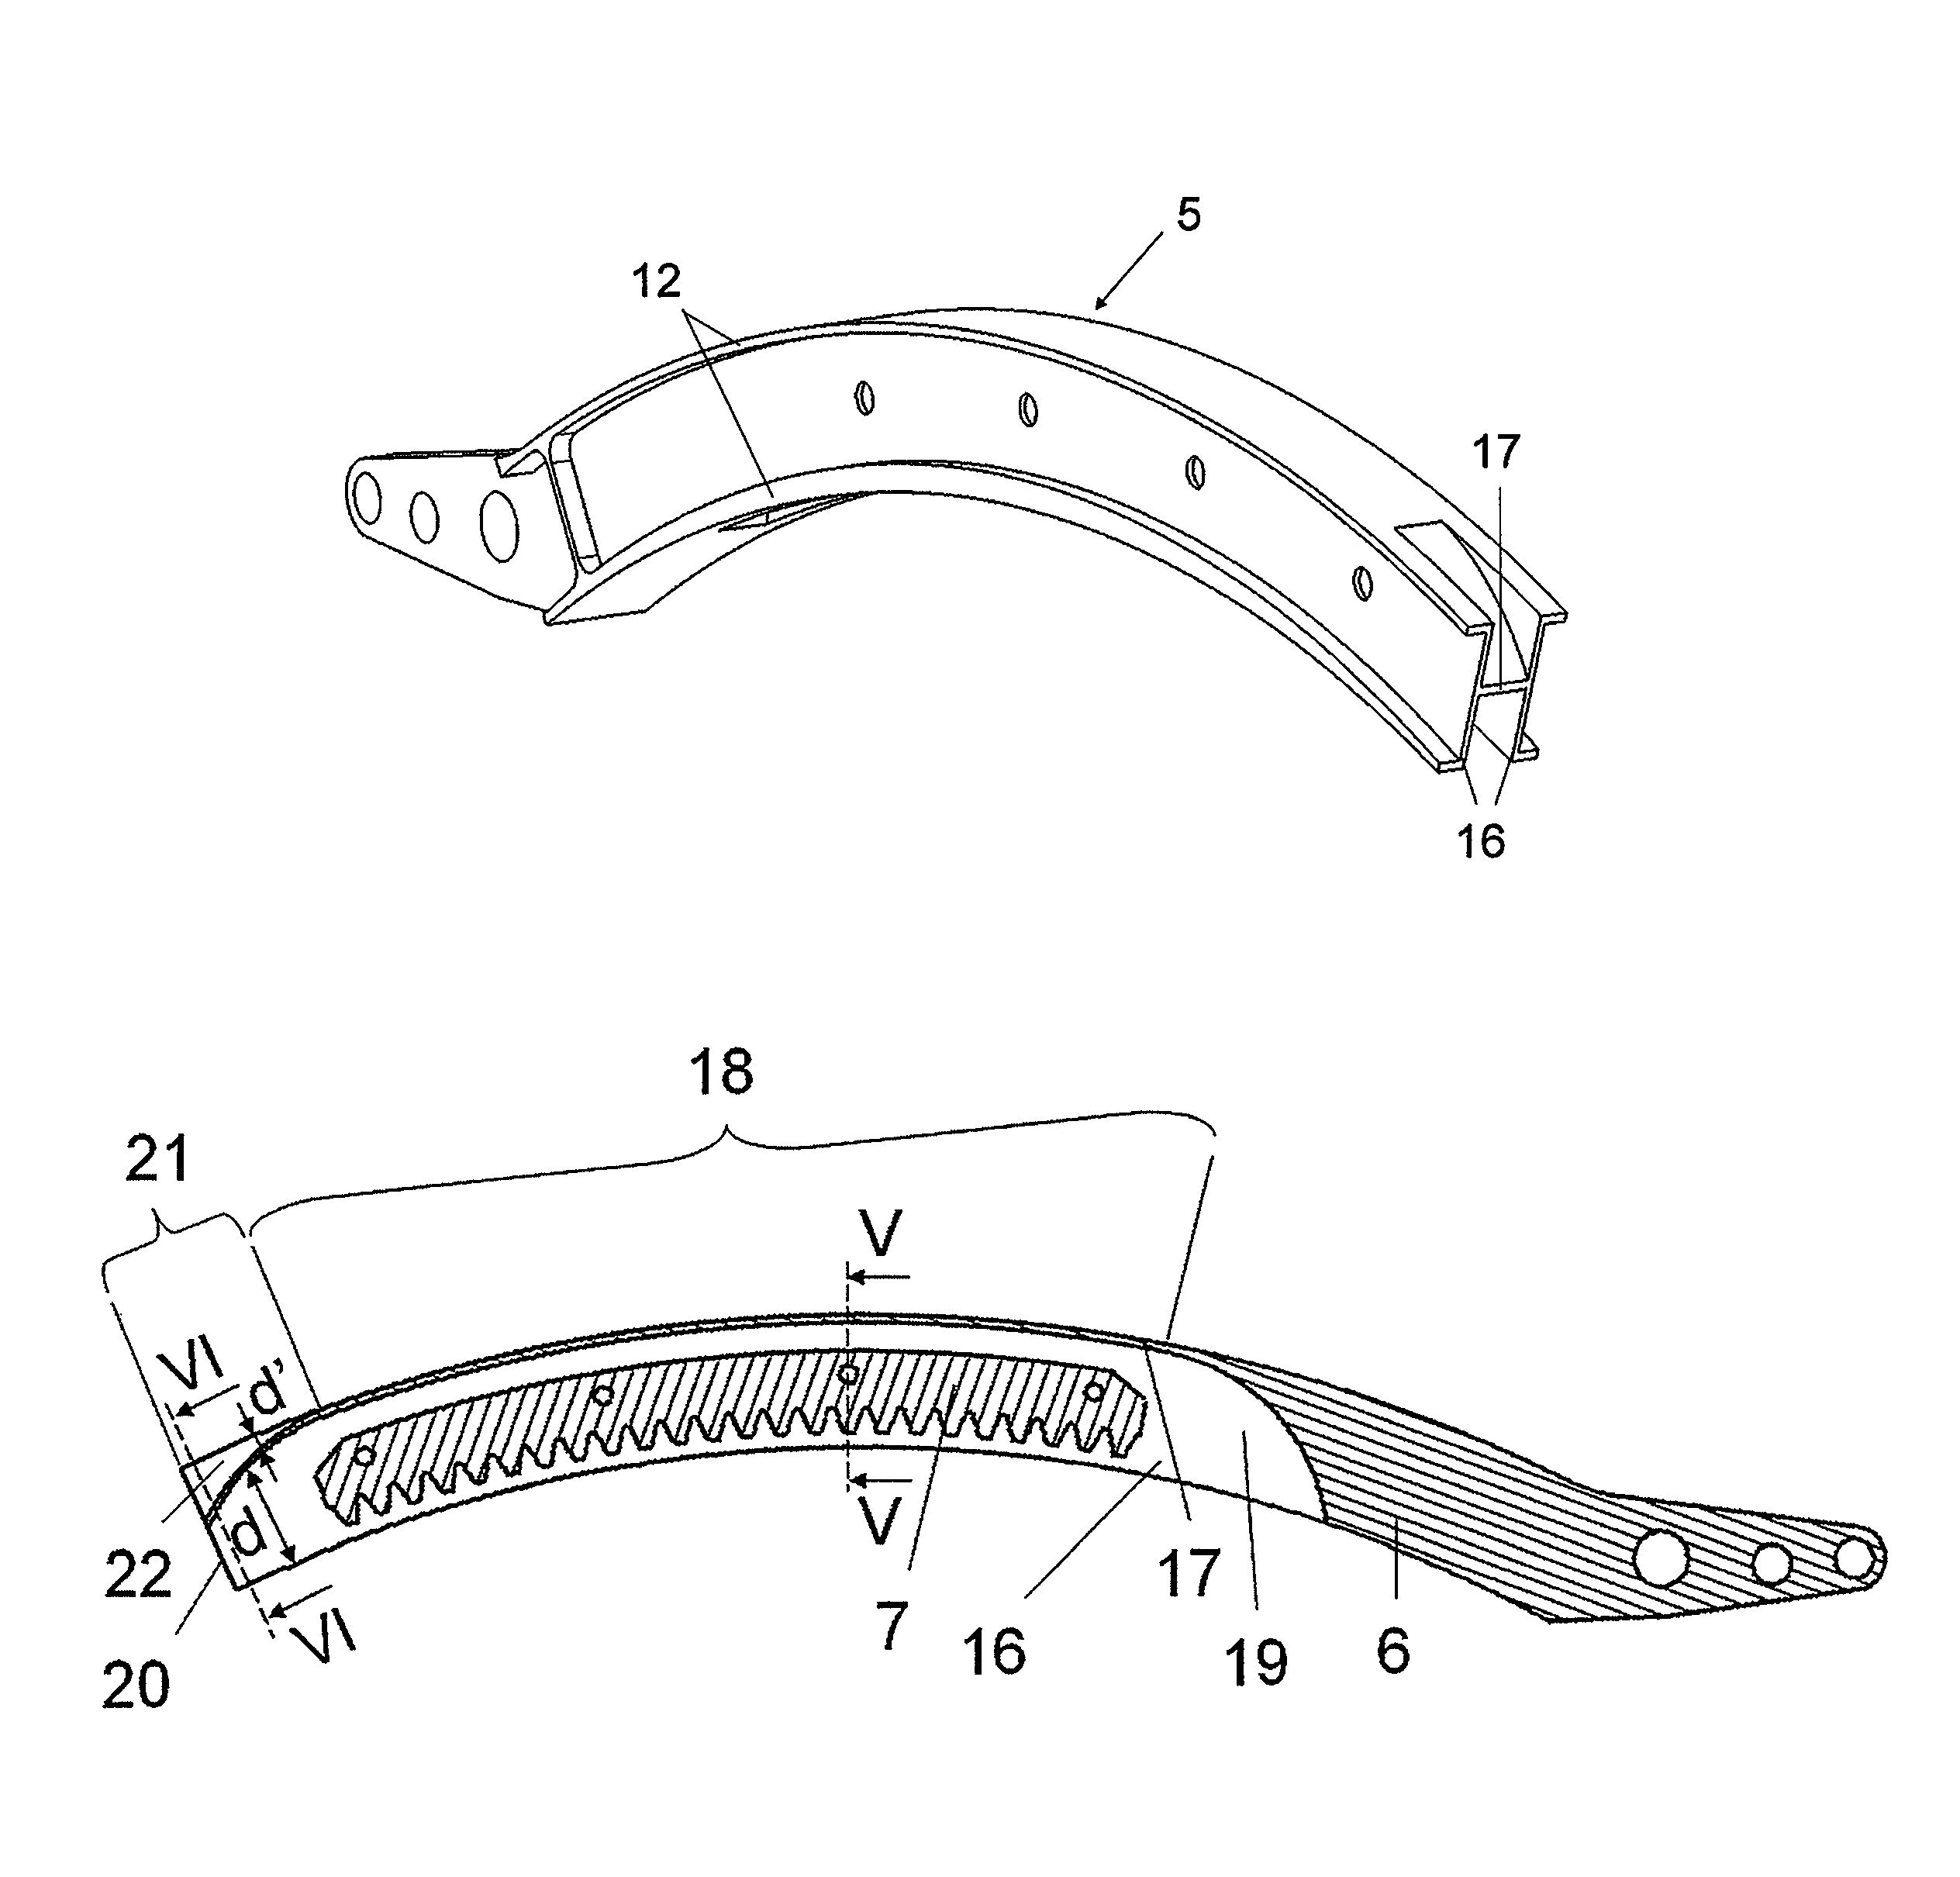 High-lift device track having a U-shaped to H-shaped cross-section